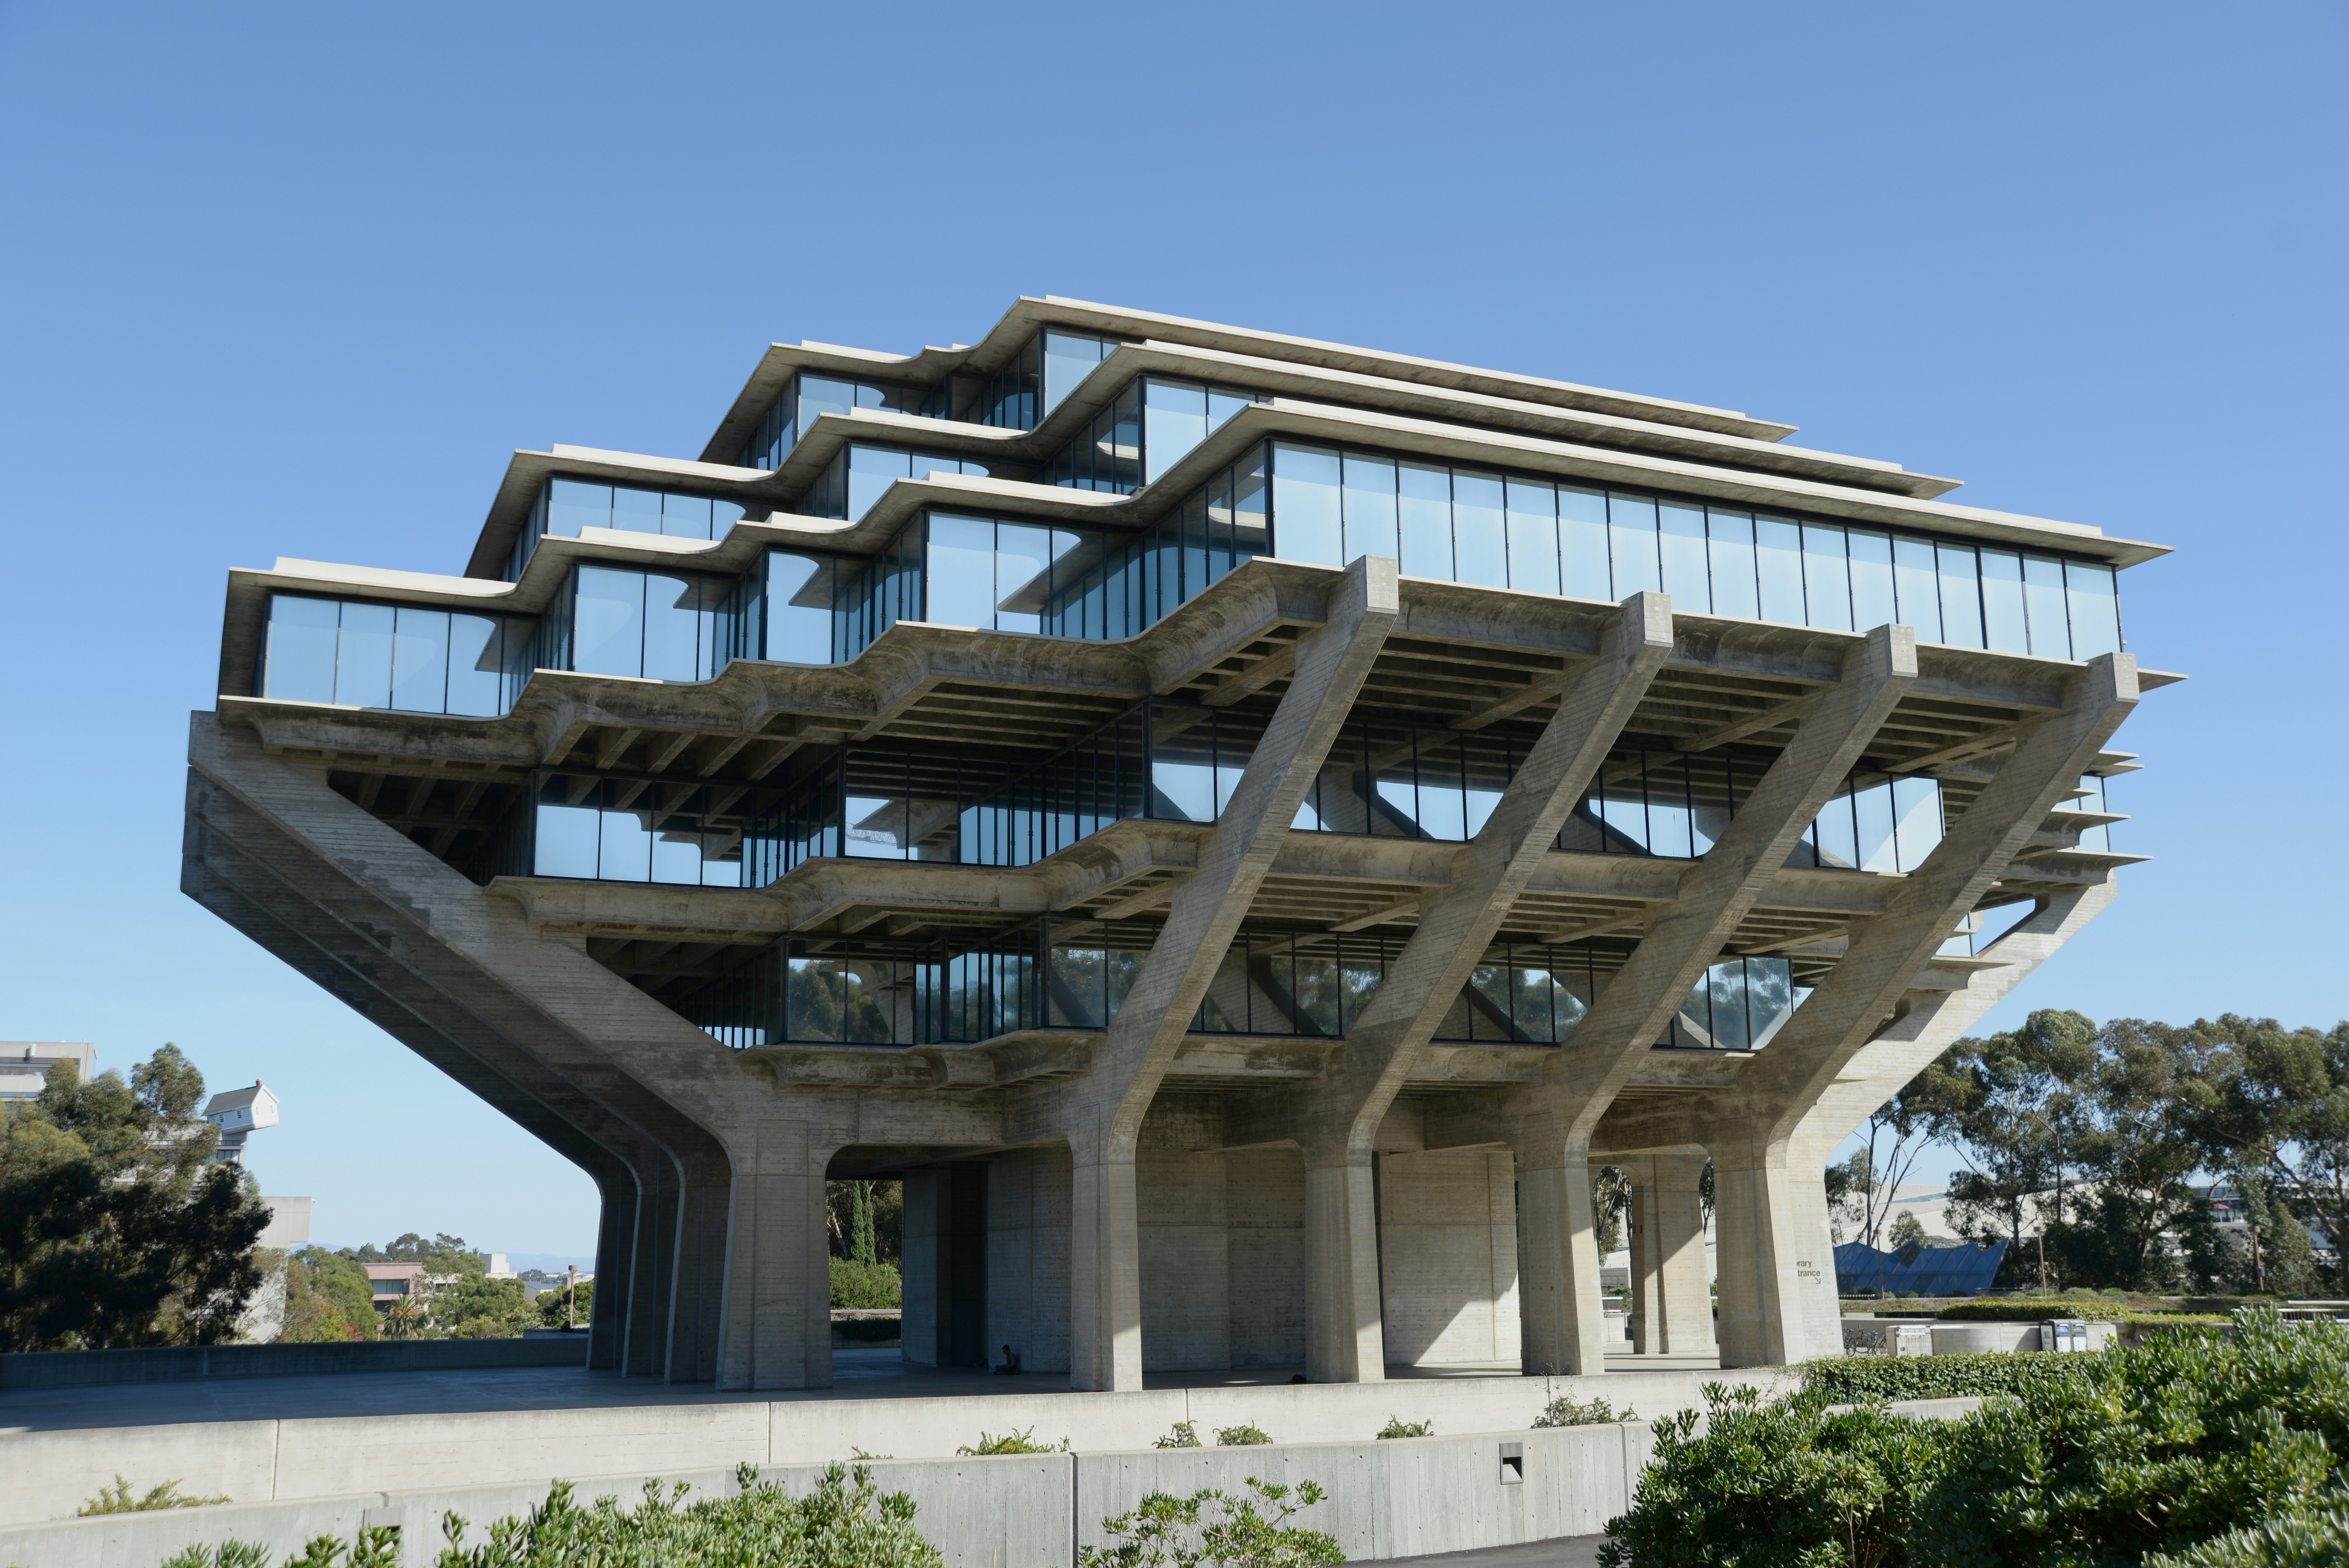 The Geisel Library may be the most recognized example of Brutalist architecture. The building is named for local author Theodor Seuss Geisel, better known as Dr. Seuss. The concrete piers of the building represent hands and the glassed-in floors represent books. Built in 1970, the Geisel Library is part of University of San Diego. The architect, William Pereira, created other famous California buildings including the Transamerica Pyramid in San Francisco. Brutalist architecture was popular in the 1950's to mid '70s, known for heavy concrete structures in harsh, abstract styles.